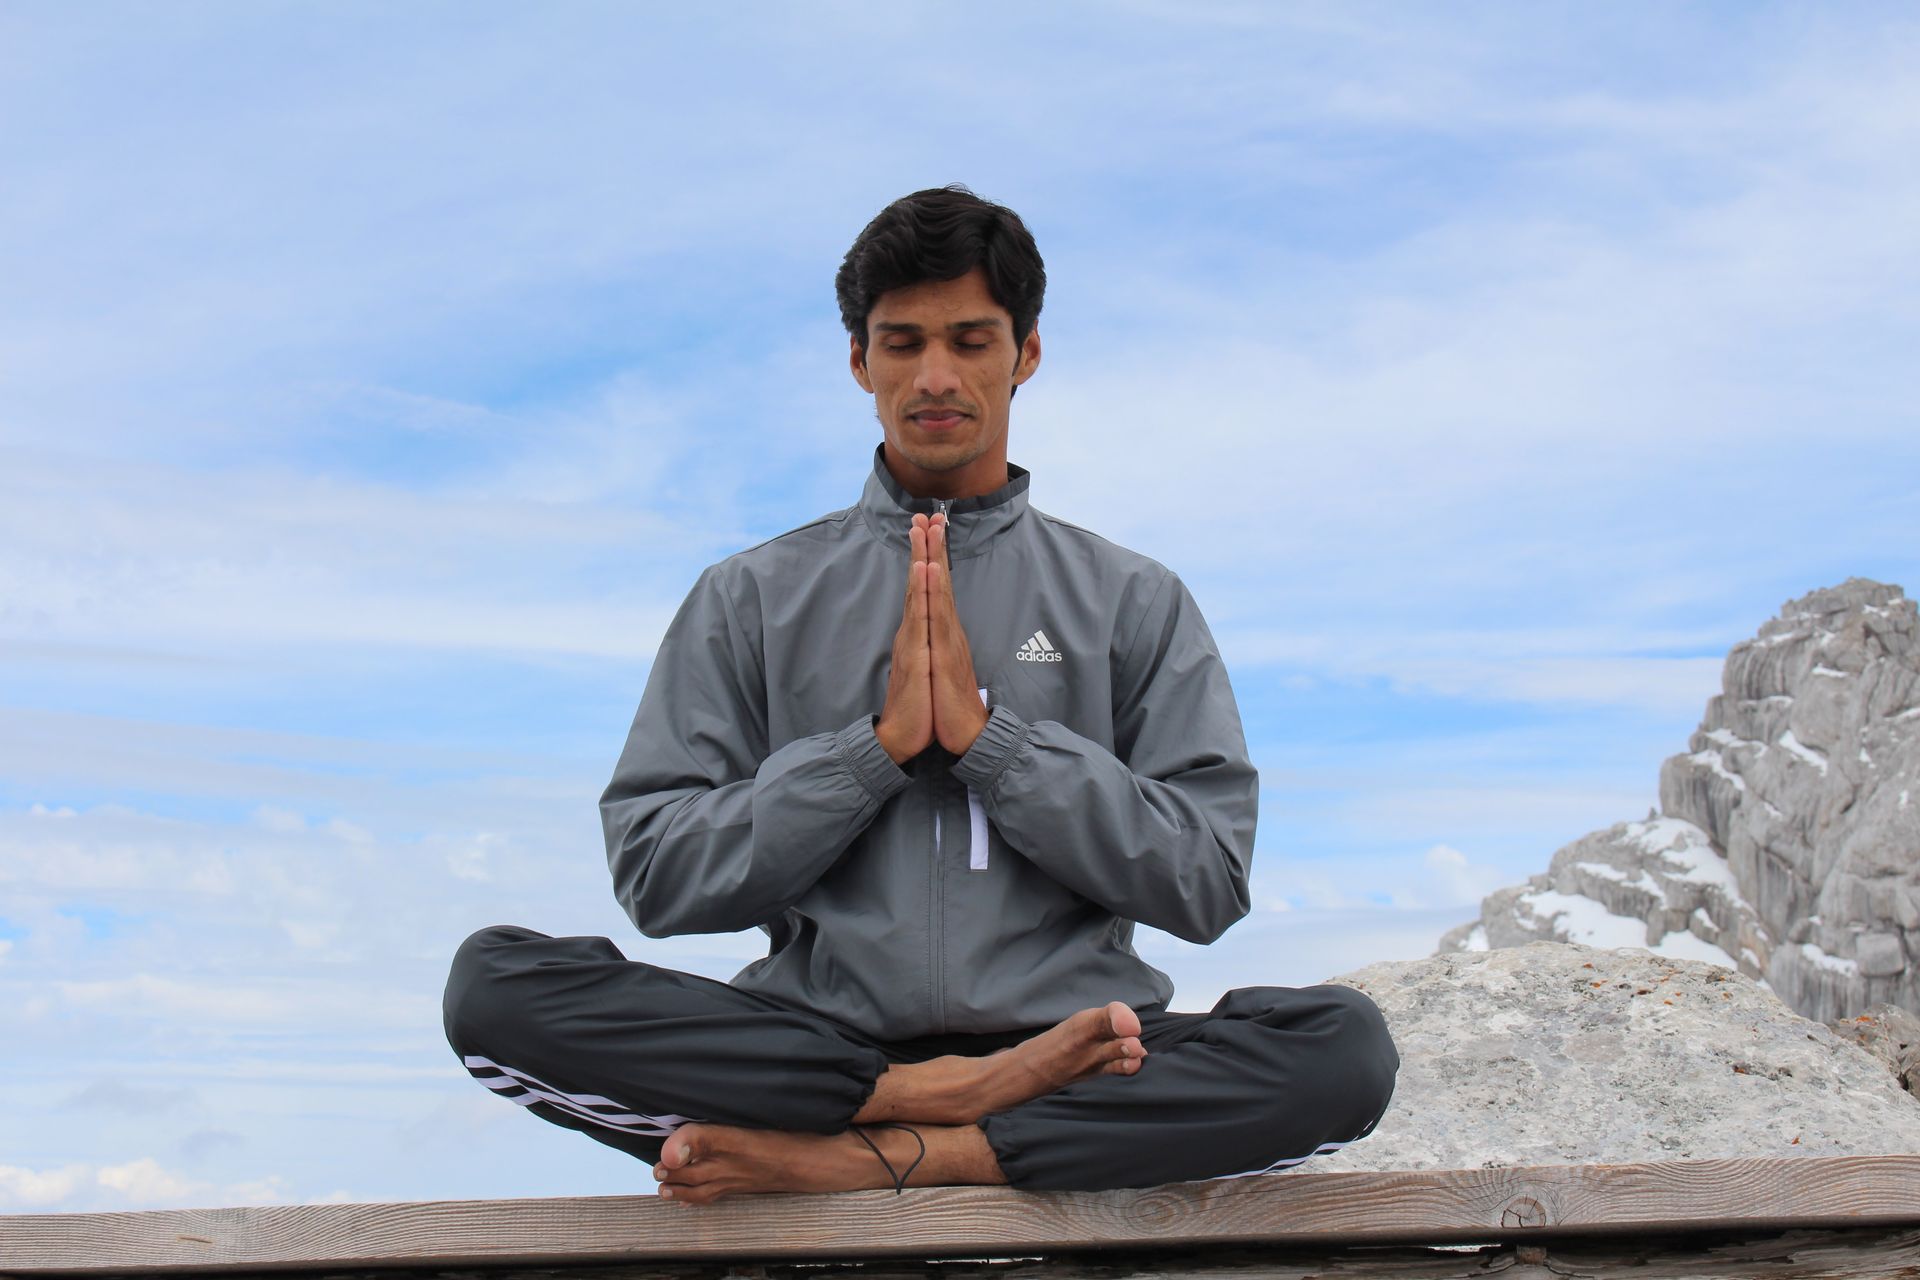 Young man sitting in the lotus position